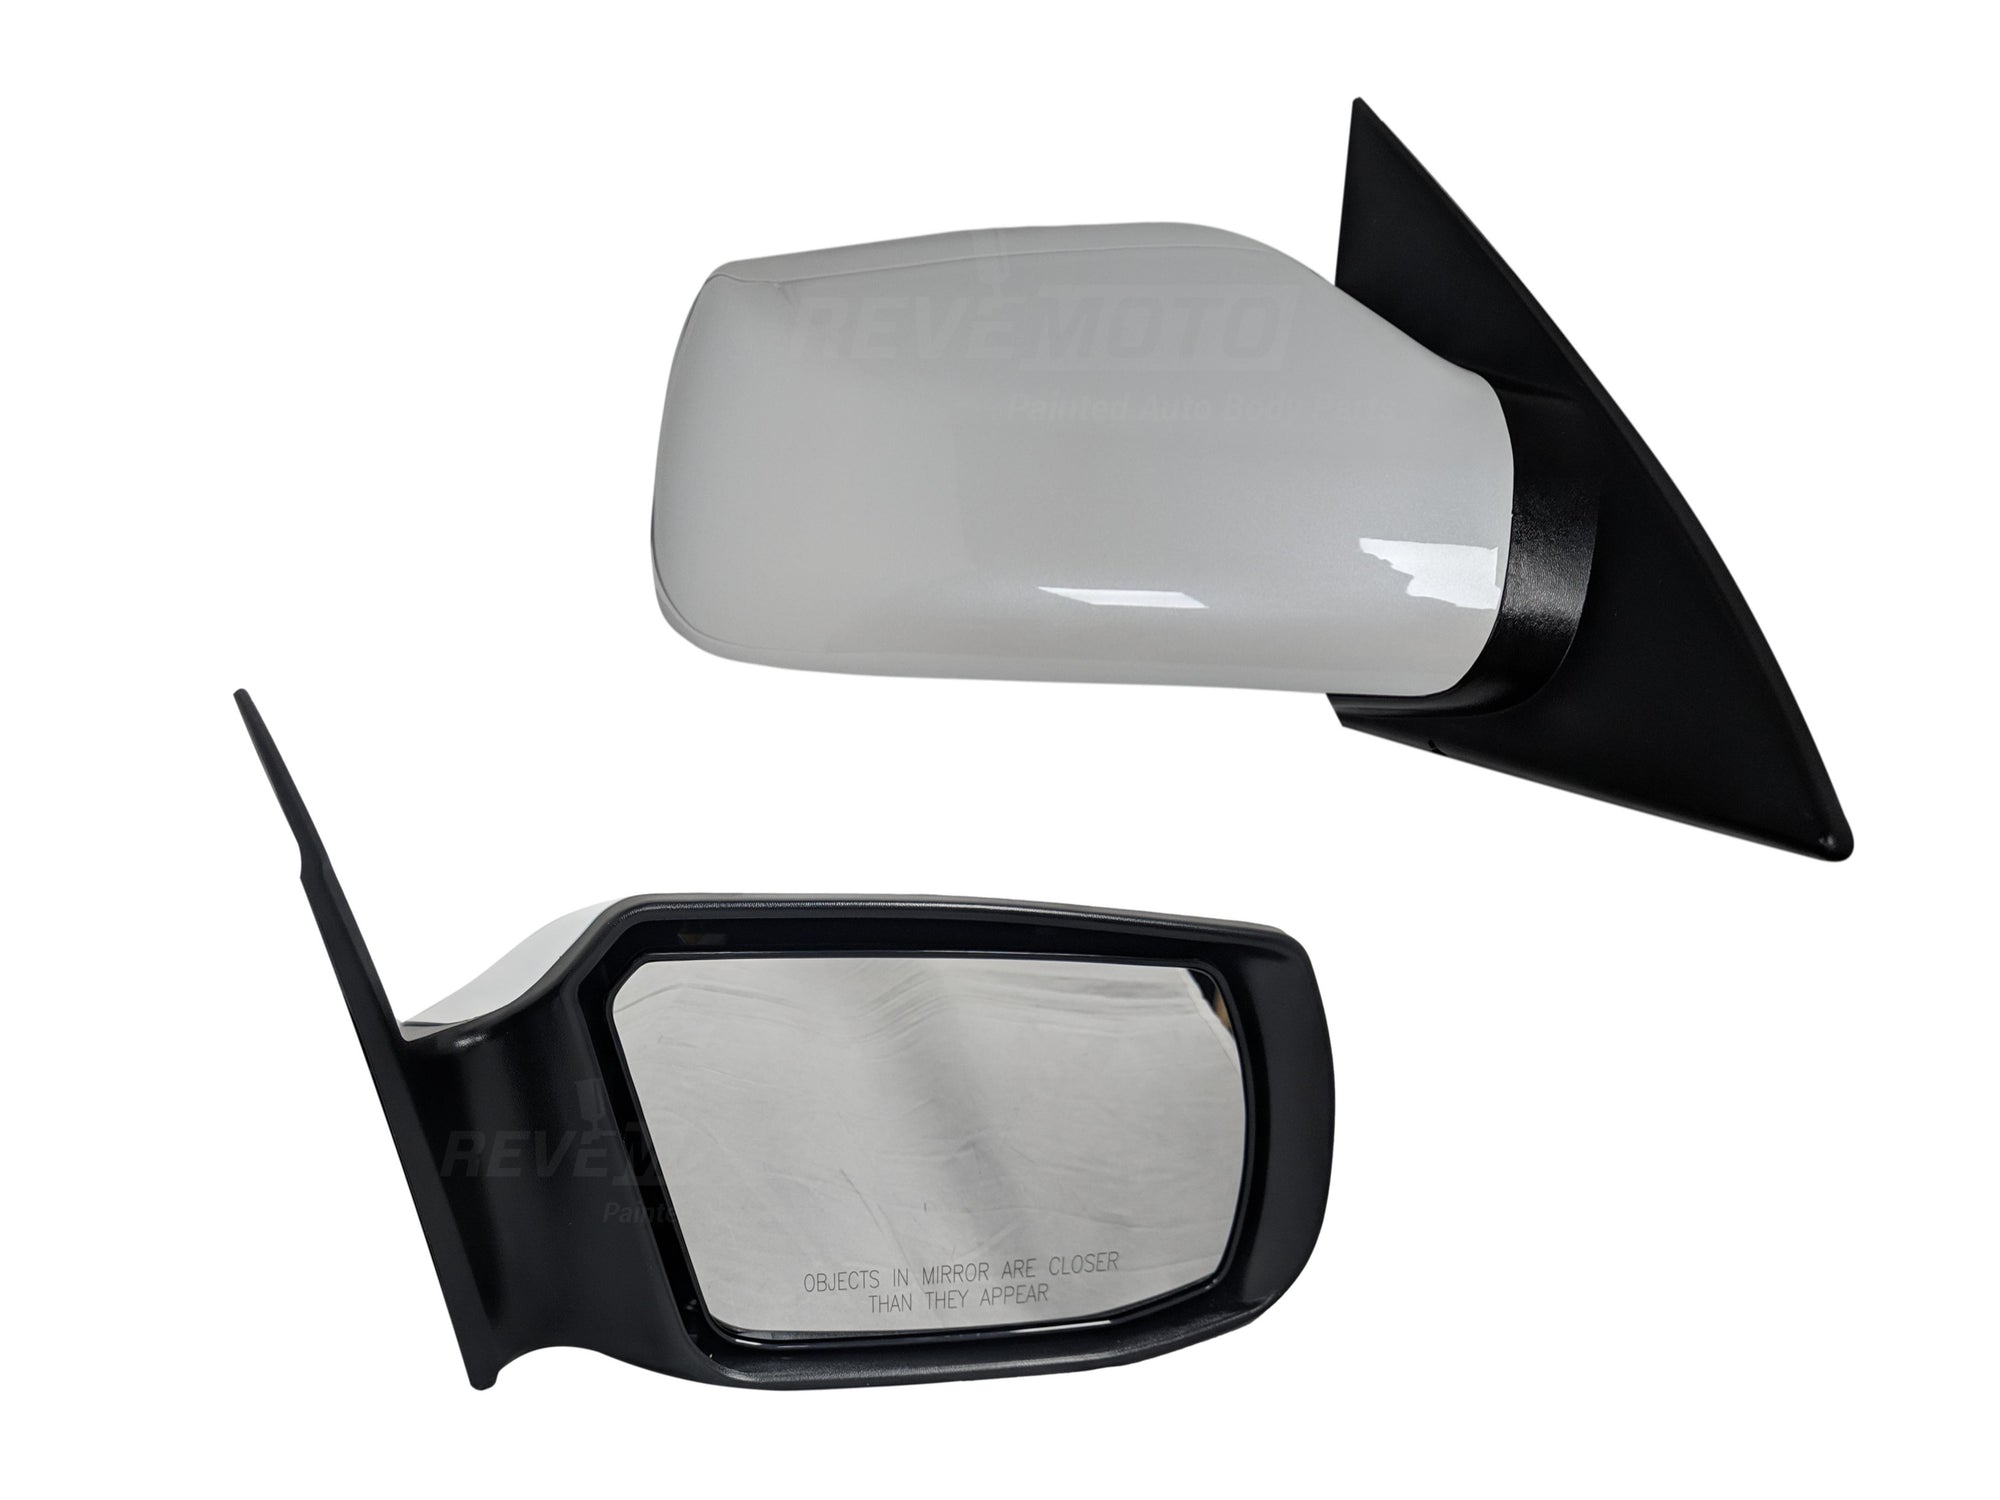 2009 Nissan Altima Driver Side View Mirror Painted, Without Heated Glass, Without Signal Lamp, 2.5 Liter, Sedan 4 Door,Code Red (A20) 96302JA04A NI1320163